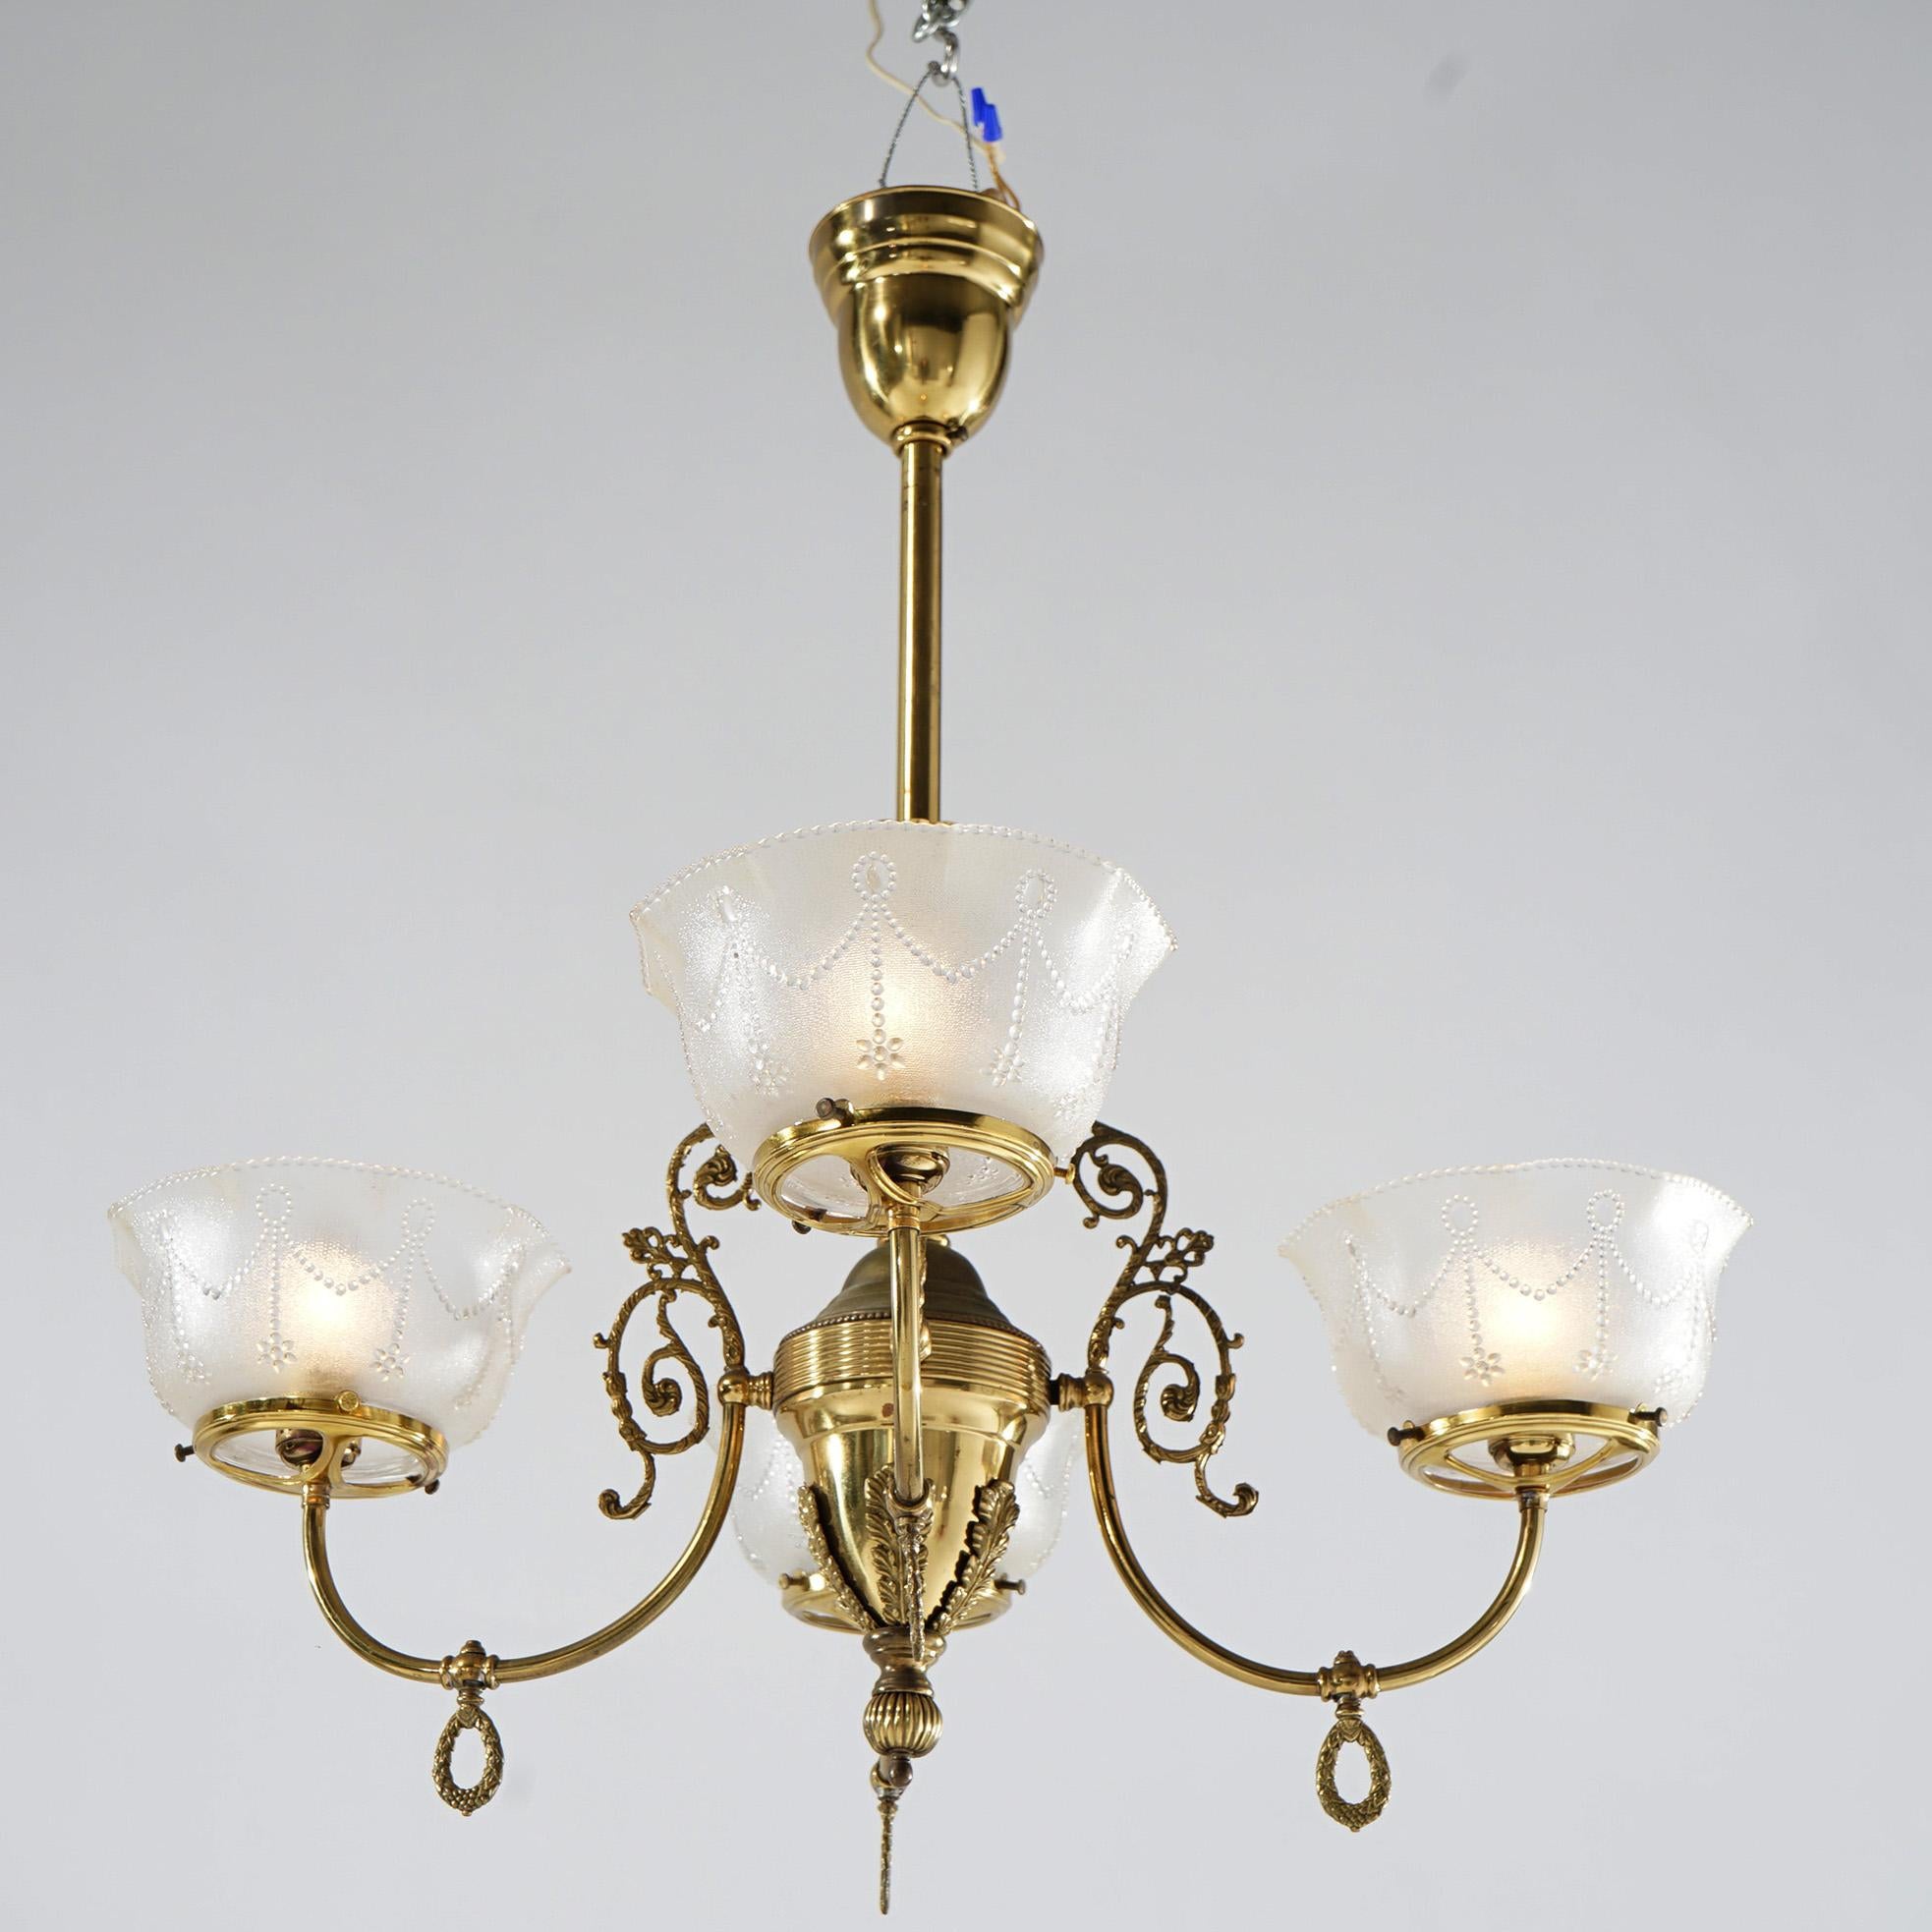 Antique Brass Four-Light Gas Hanging Fixture, Converted to Electric, 19th C 4